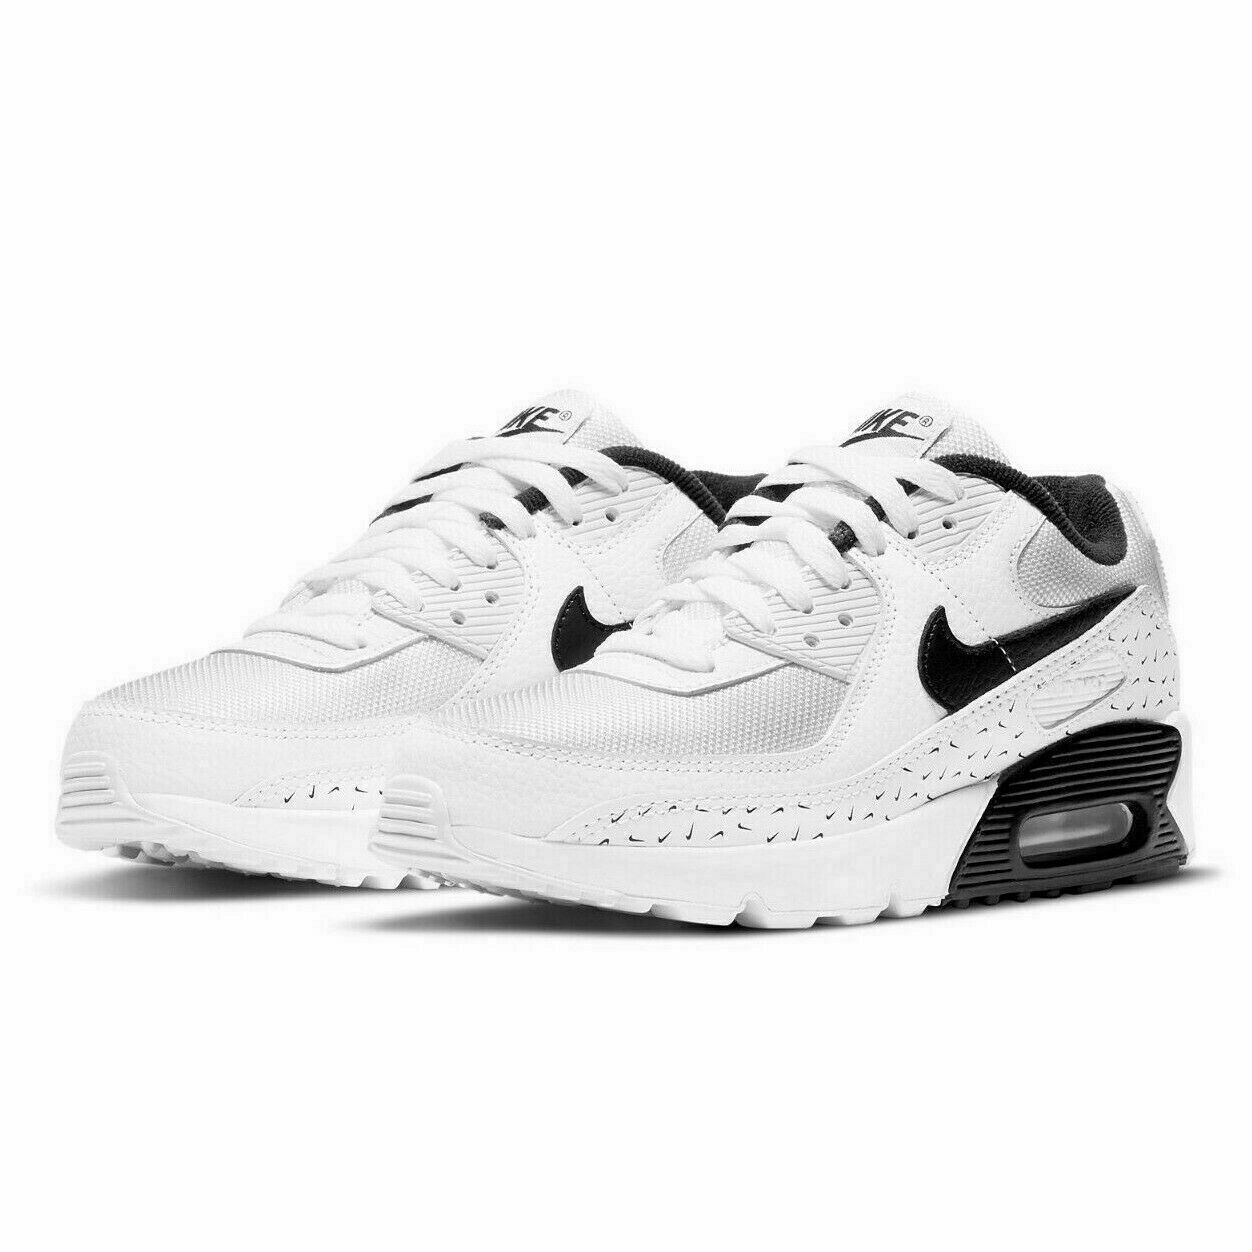 Nike Air Max 90 GS Shoes Youth Size 7Y (BRAND NEW)